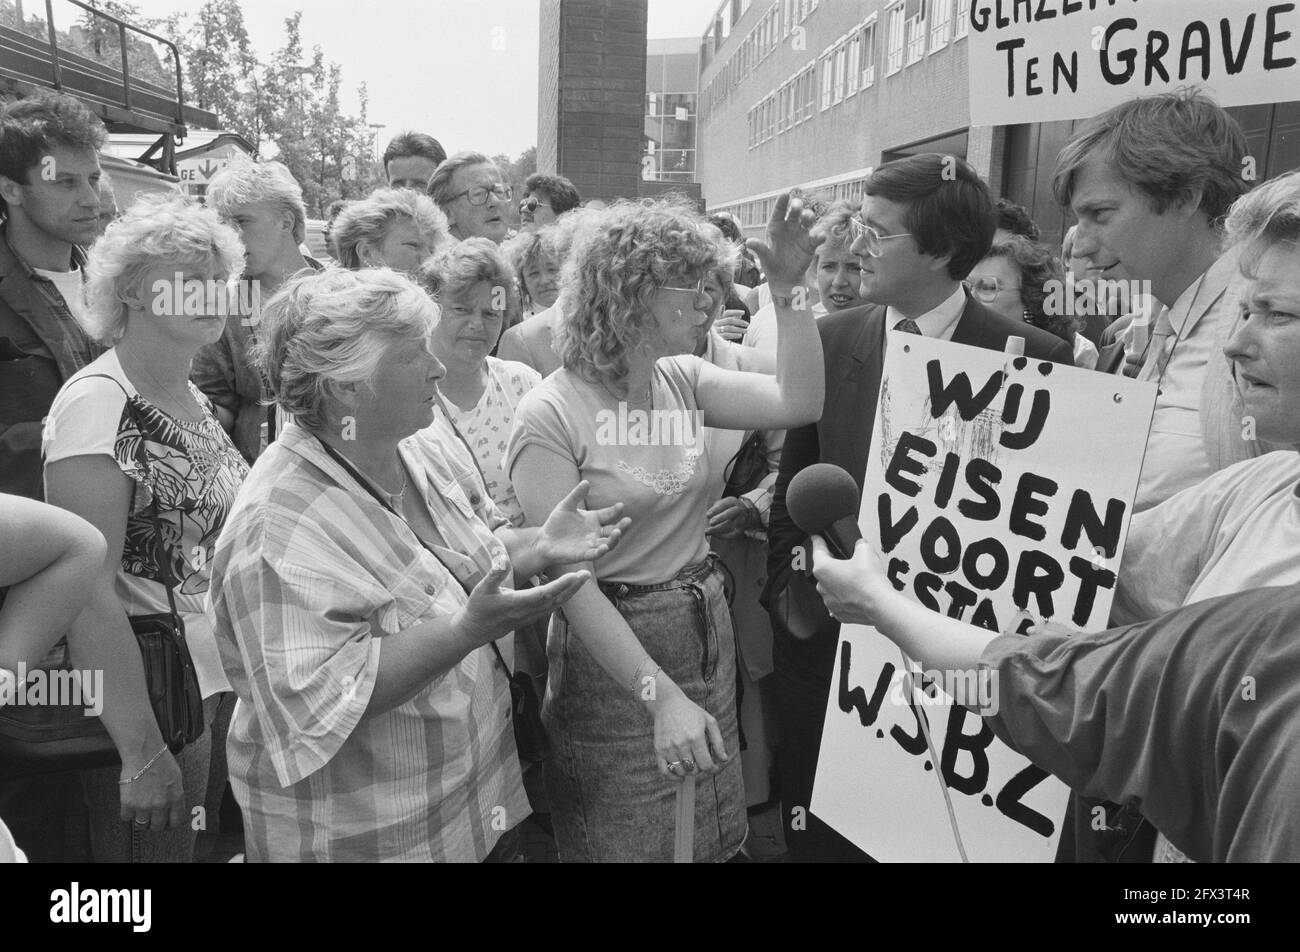 Demonstration employees municipal cleaning company WSBZ against privatization with aldermen Jonker (glasses) and Ten Have on the right, May 25, 1988, PRIVATISATION, EMPLOYEES, LEGISLATORS, demonstrations, cleaning companies, The Netherlands, 20th century press agency photo, news to remember, documentary, historic photography 1945-1990, visual stories, human history of the Twentieth Century, capturing moments in time Stock Photo